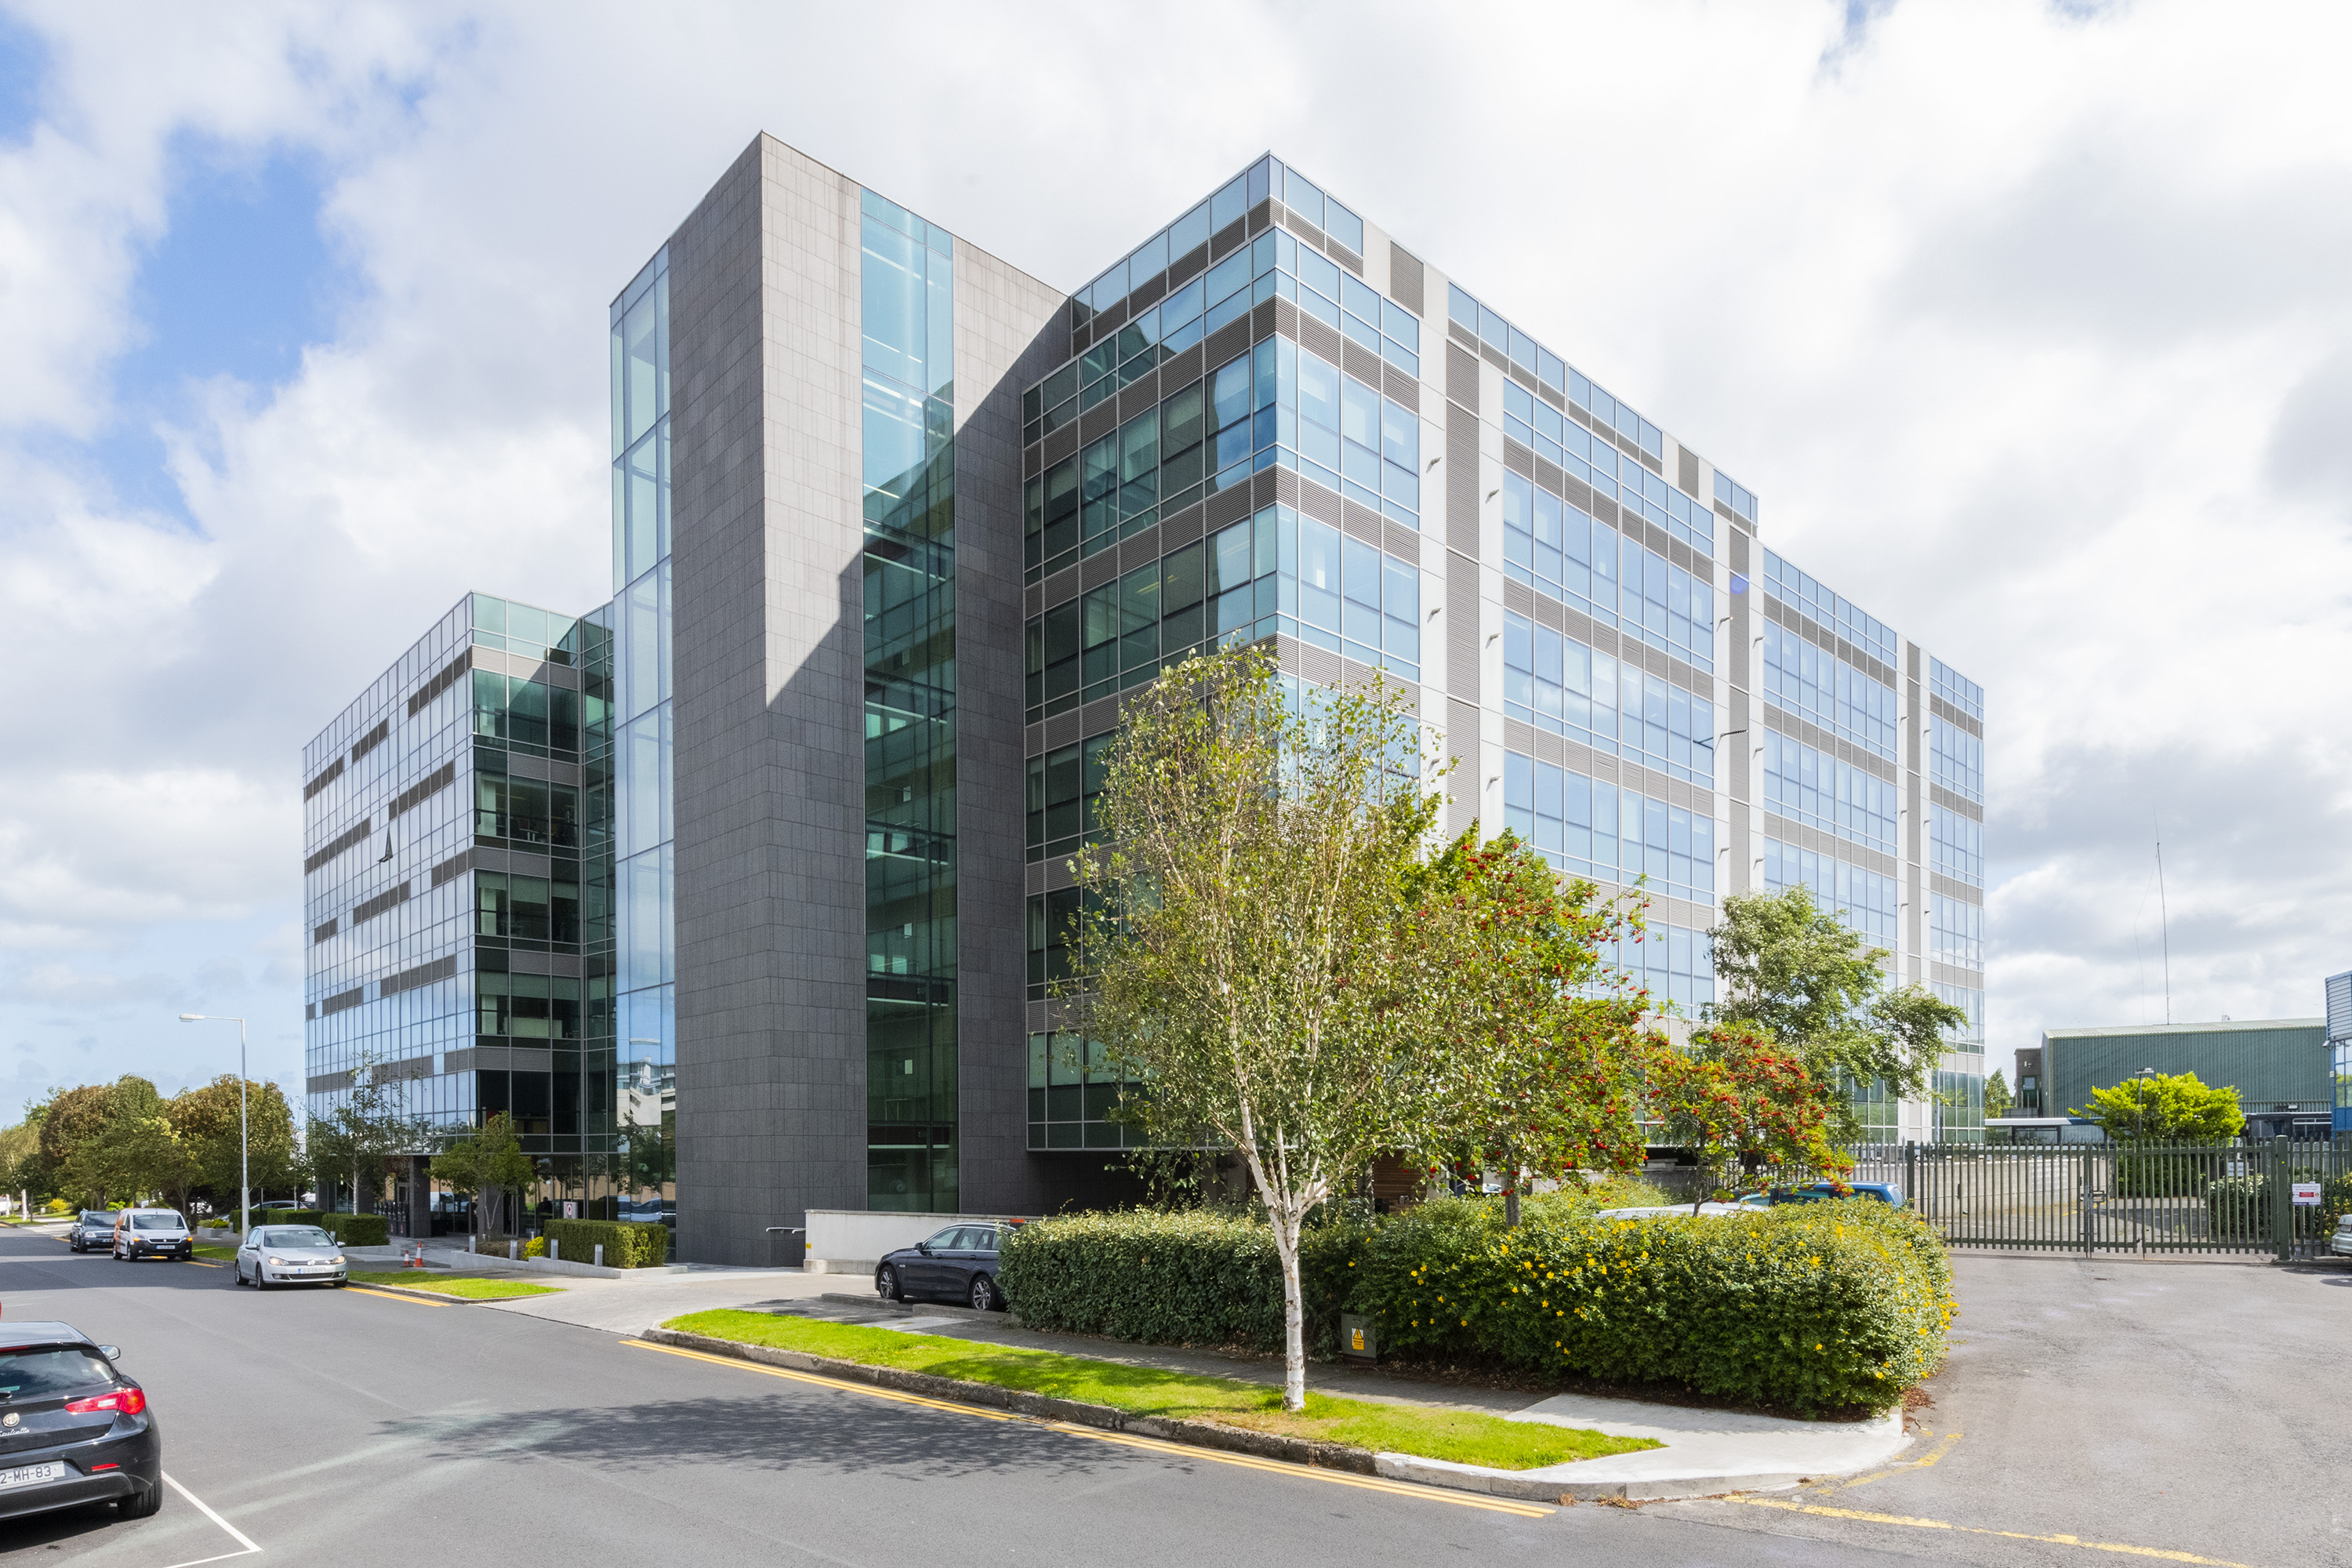 Sandyford office investment at €625k offers attractive 7% net initial yield